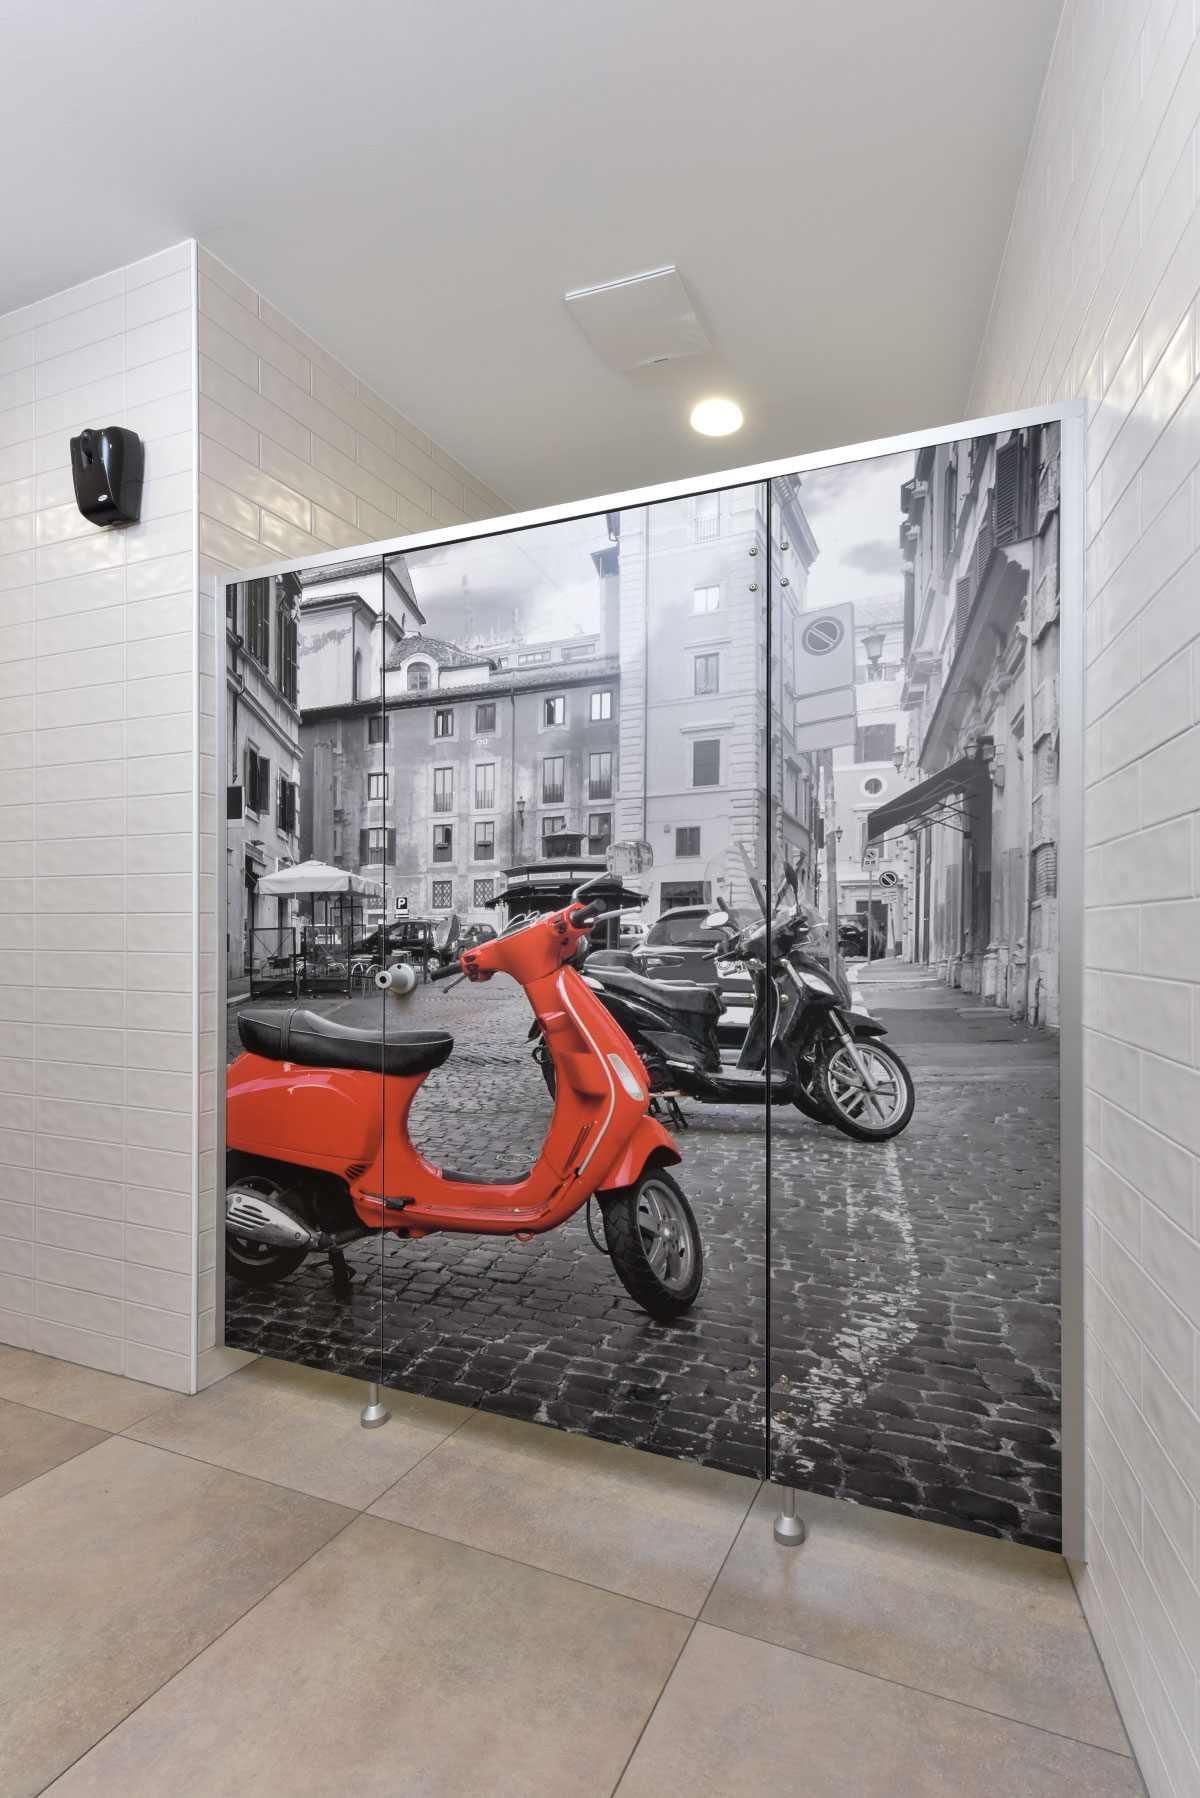 Digitally printed bistro bathroom partitions with Fundermax phenolic panels